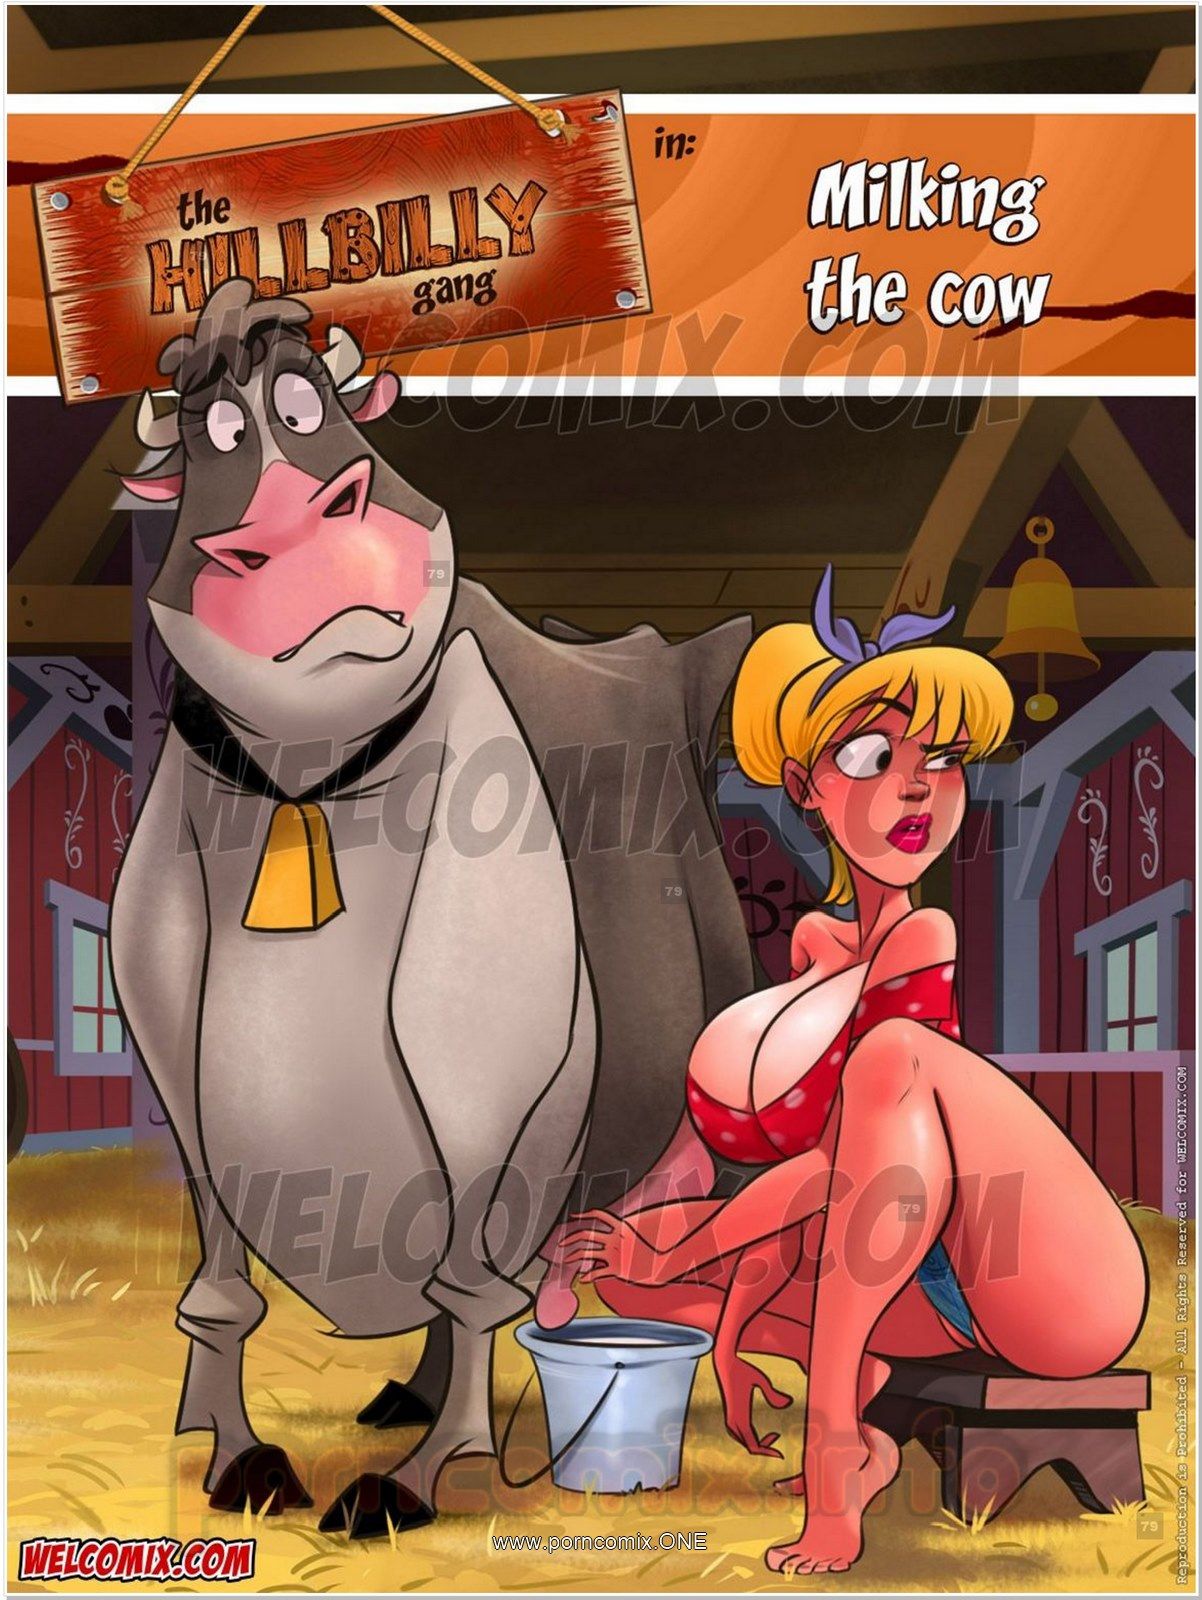 Welcomix-Hillbilly Gang 7 - Milking the Cow page 1